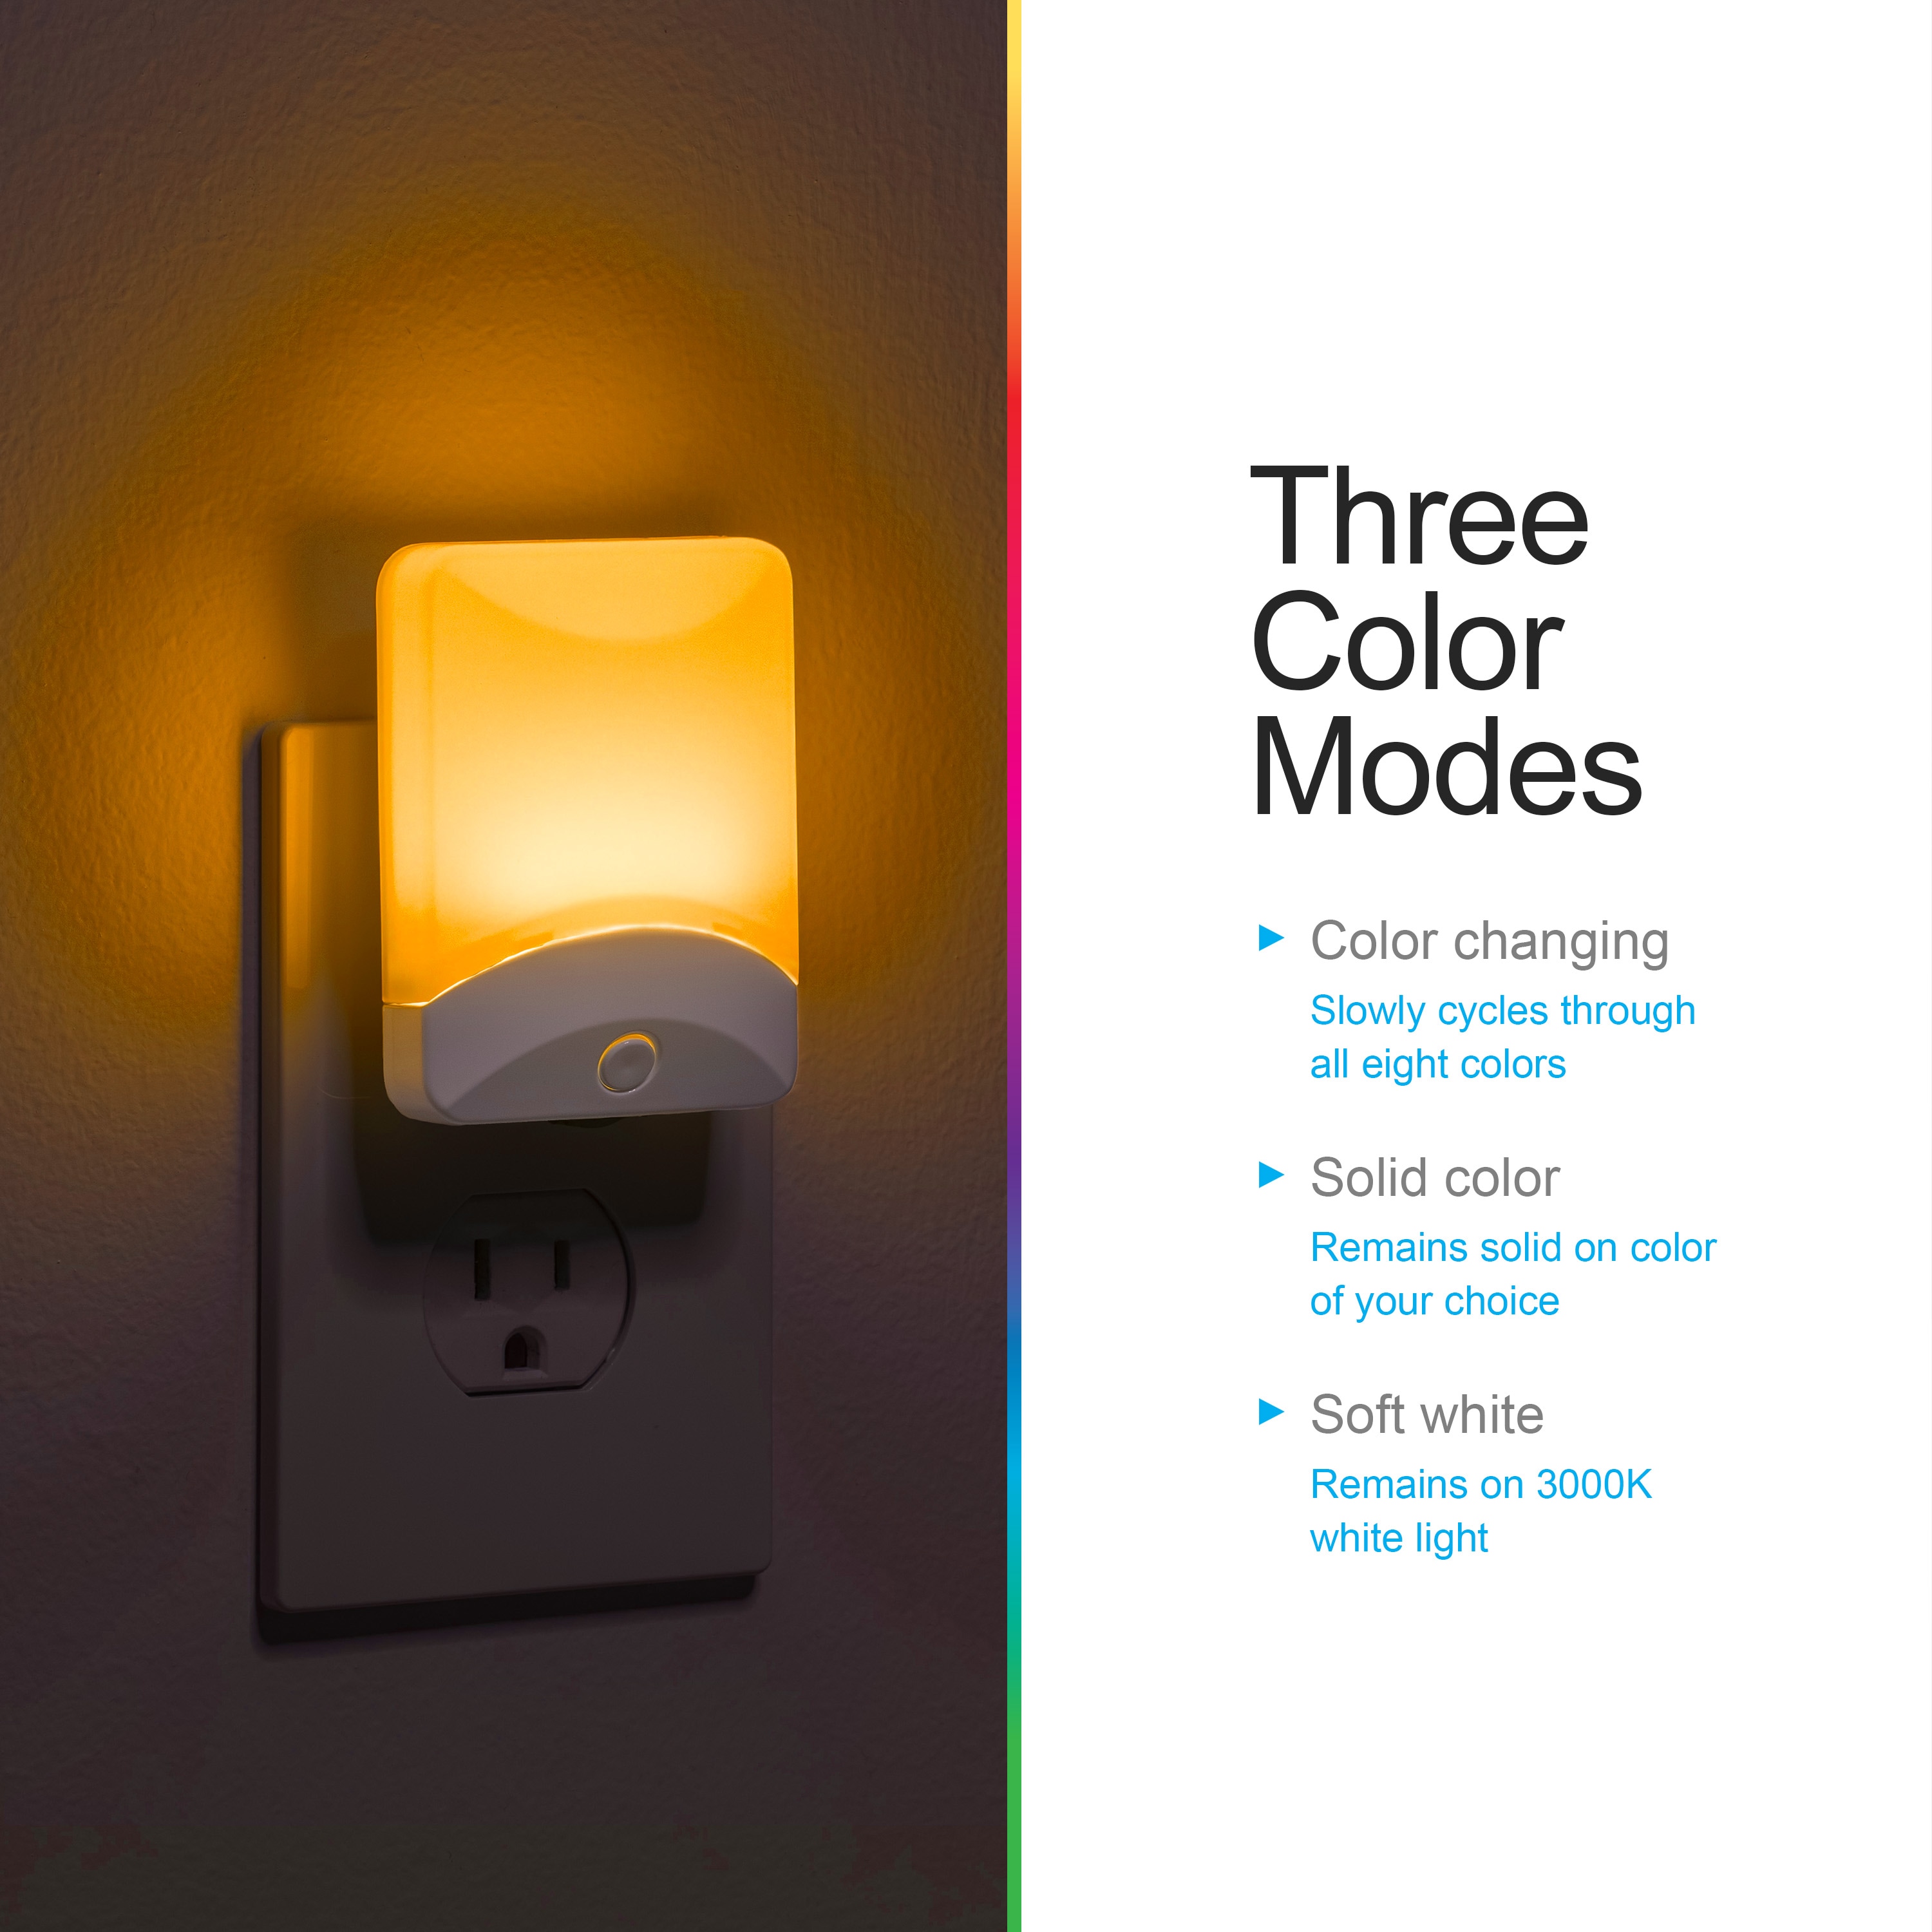 6 Pack Blue Bright Night Light, Dusk to Dawn PlugLED Night Lights Plug into  Wall, Night Lights for The Home Plug In for Kids, Bedroom